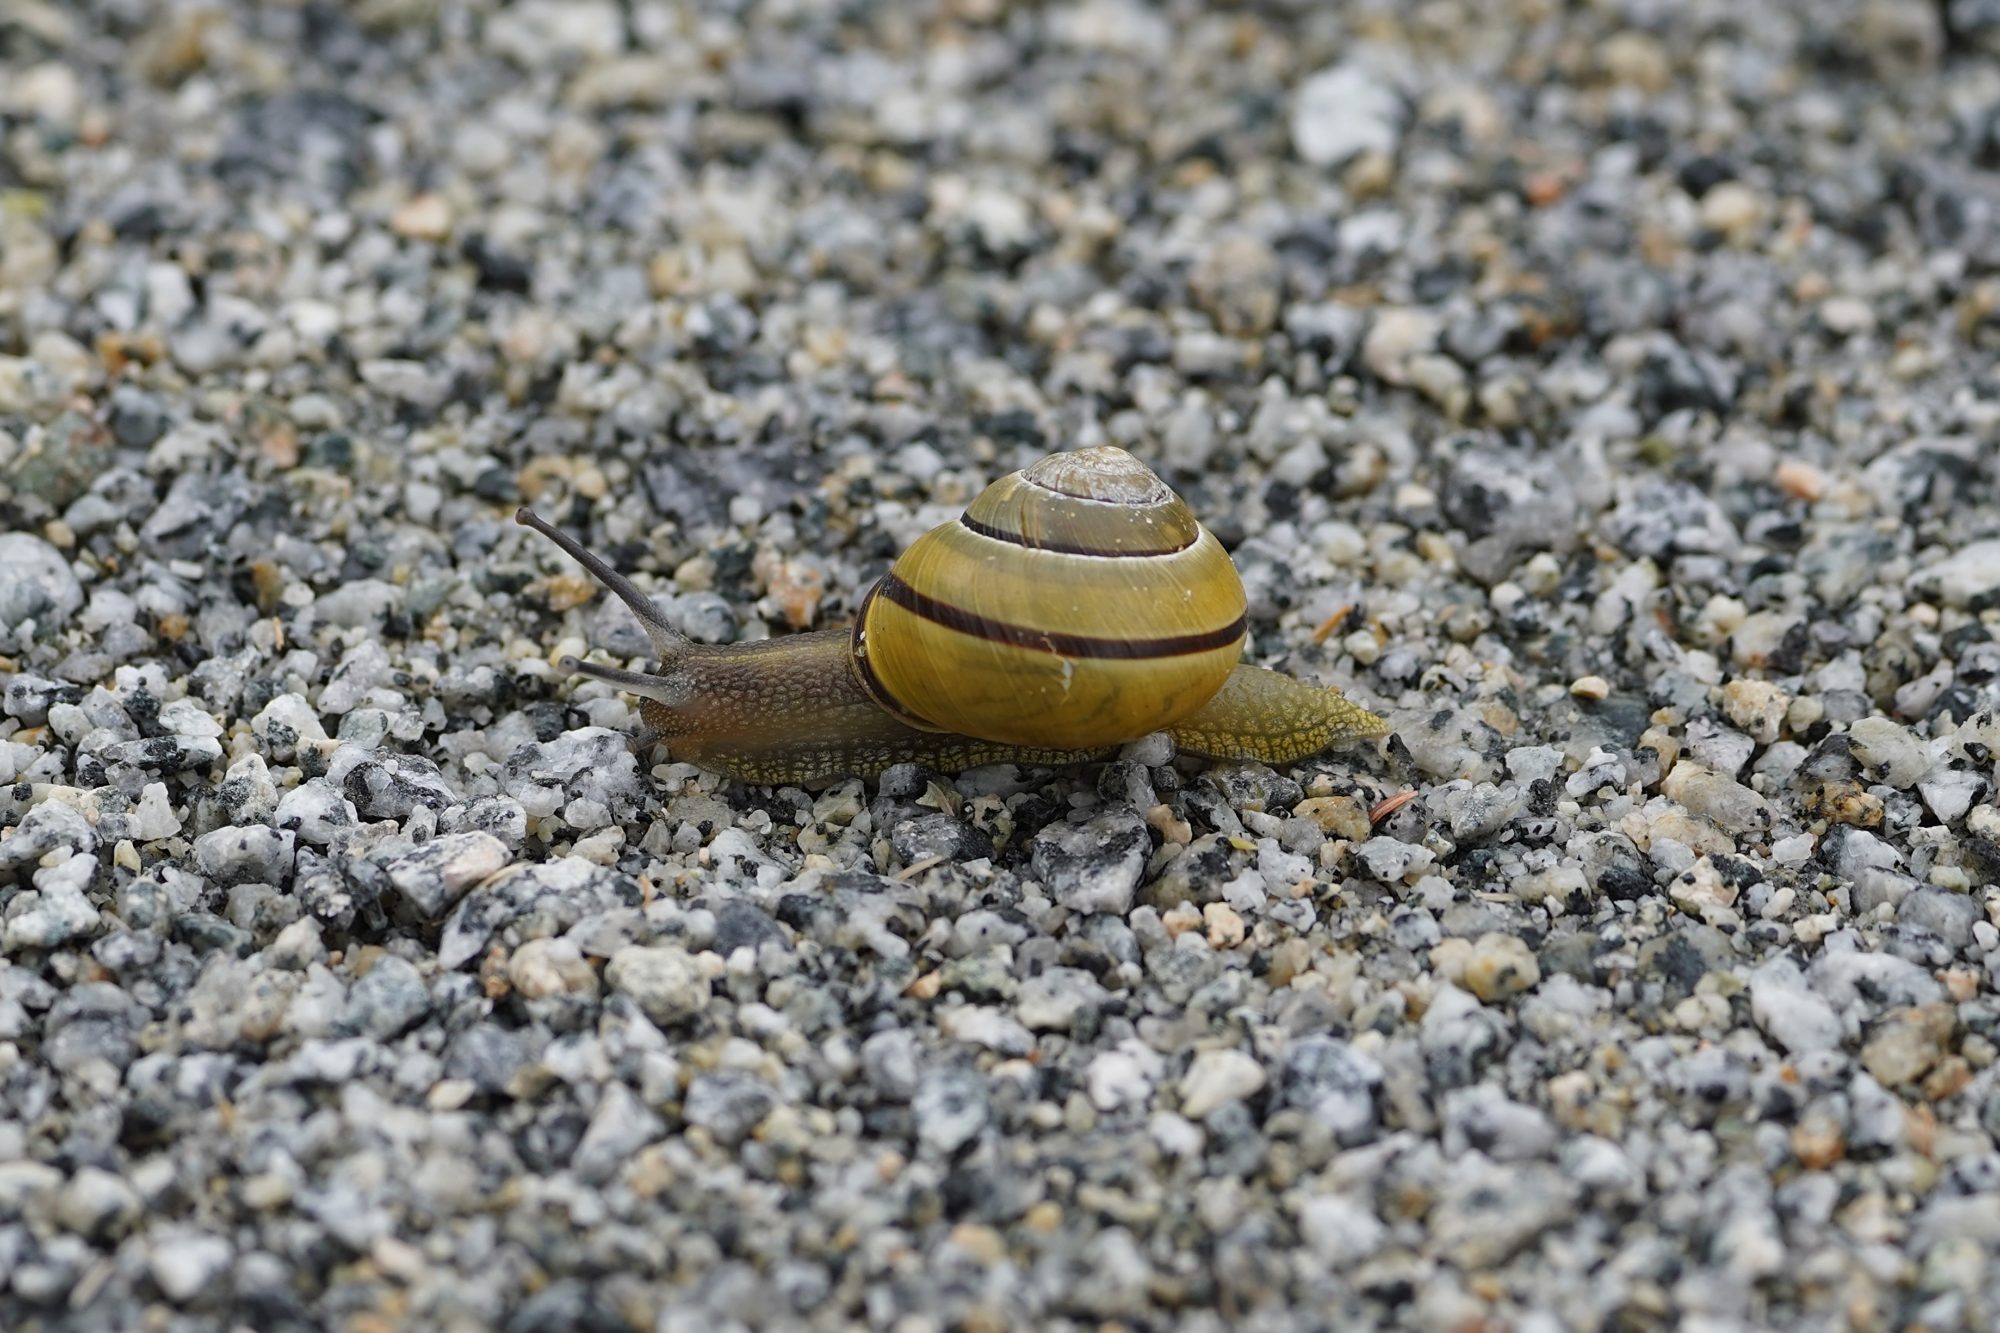 A snail on the gravelly trail